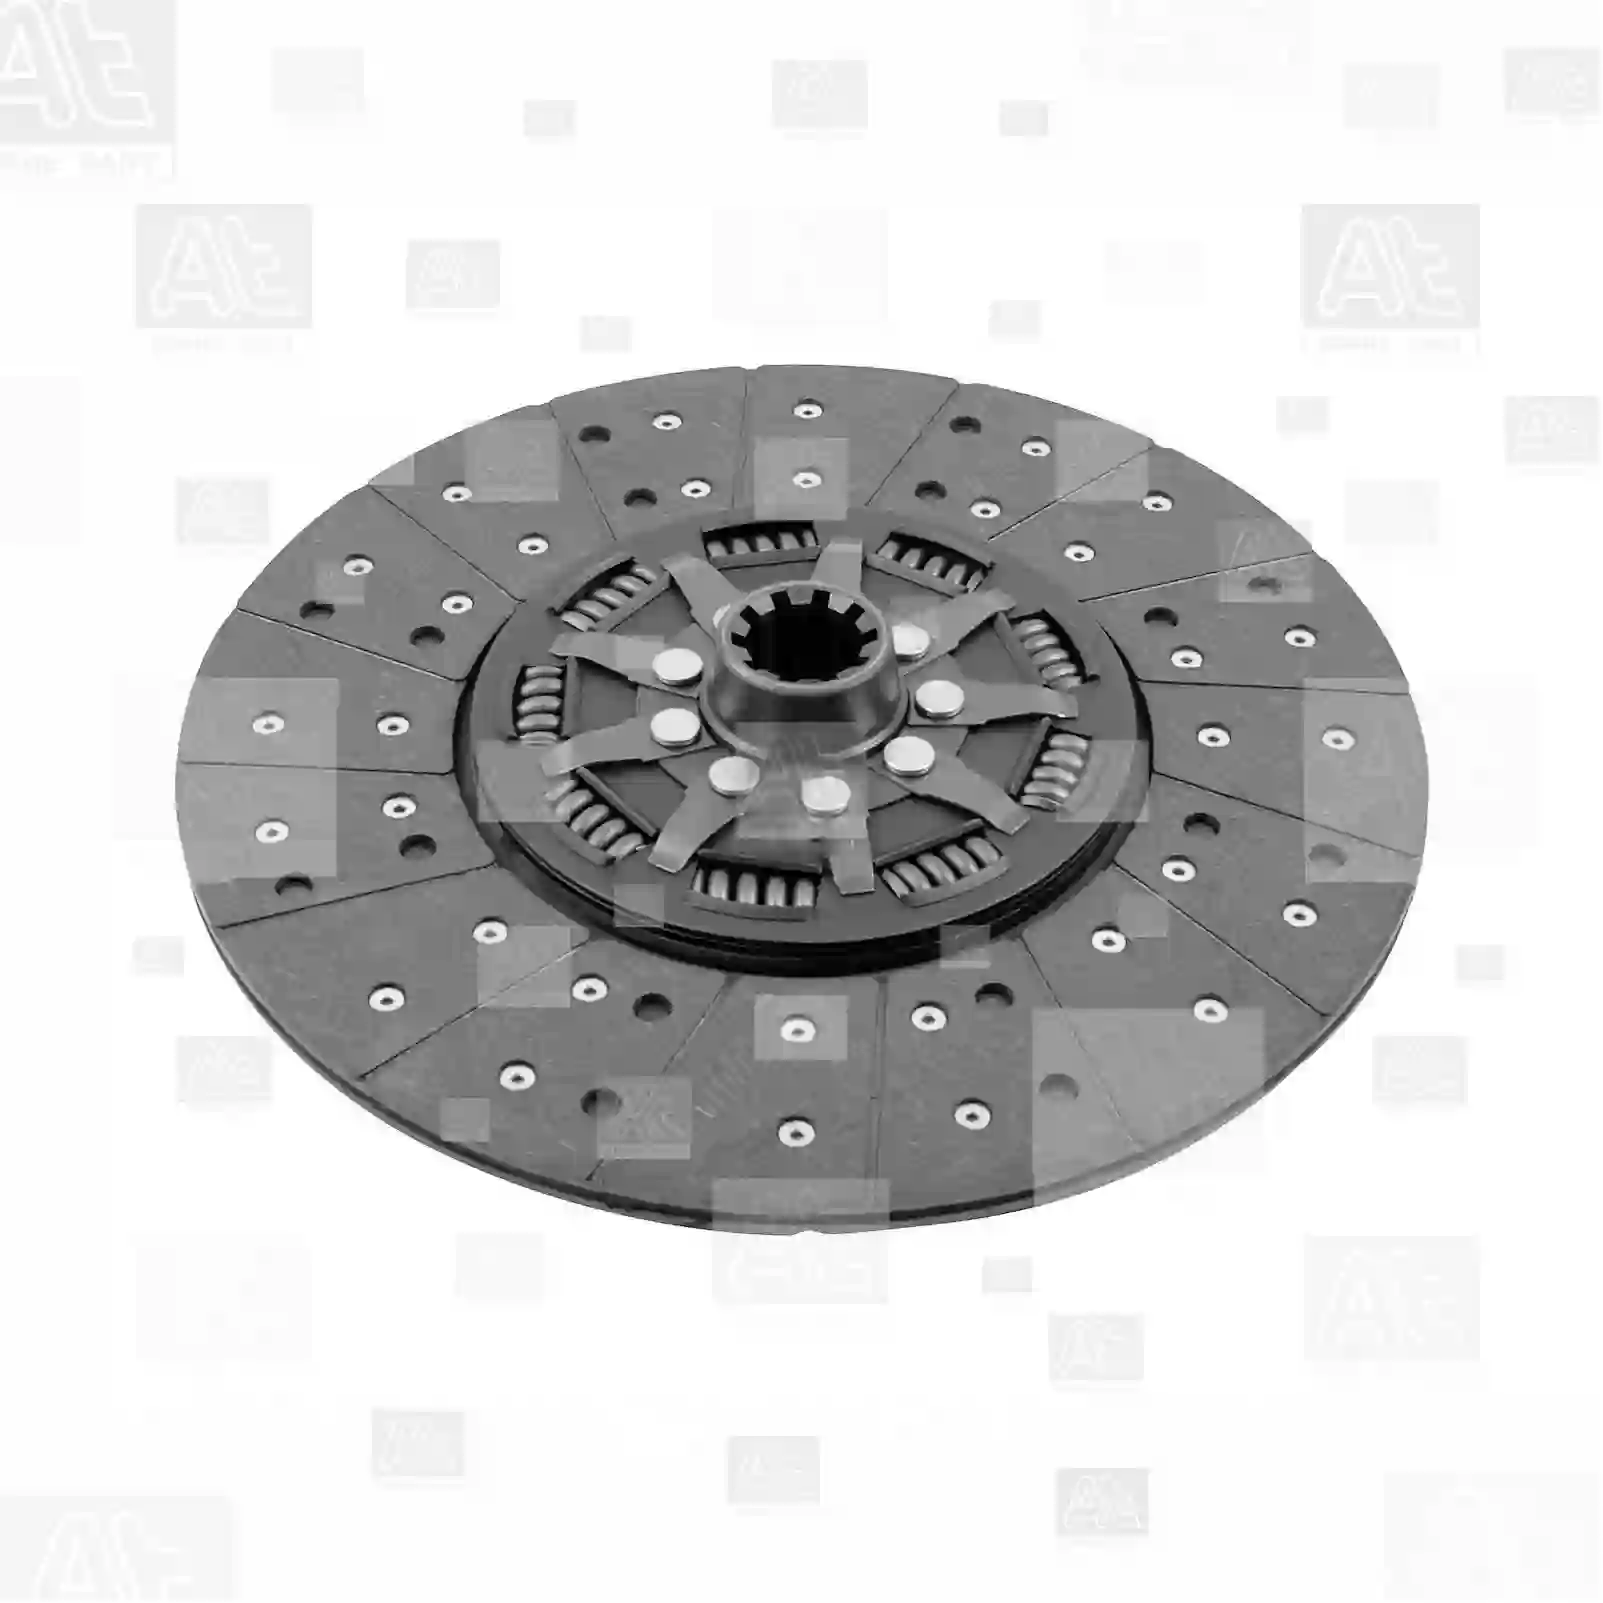 Clutch disc, at no 77722460, oem no: 01260096, 01903850, 01903855, 01903948, 01903949, 02246046, 02246046KZ0148-52, 02476075, 02477936, 42102154, 8751525135, 8751525155, 0890261, 01260096, 01903850, 01903855, 01903948, 01903949, 02476075, 02477936, 42102154, 8751525135, 8751525155, 01260096, 01903850, 01903855, 01903948, 01903949, 02476075, 02477936, 42102154, 8751525135, 8751525155, 81303016005, 0002503203, 0002509103, 0012500203, 0012502703, 0012505703, 0012509703, 0022501303, 0022501403, 0042509003, 0092504003, 009250400380, 8383092000, 614160003, 5052220, 8751525135 At Spare Part | Engine, Accelerator Pedal, Camshaft, Connecting Rod, Crankcase, Crankshaft, Cylinder Head, Engine Suspension Mountings, Exhaust Manifold, Exhaust Gas Recirculation, Filter Kits, Flywheel Housing, General Overhaul Kits, Engine, Intake Manifold, Oil Cleaner, Oil Cooler, Oil Filter, Oil Pump, Oil Sump, Piston & Liner, Sensor & Switch, Timing Case, Turbocharger, Cooling System, Belt Tensioner, Coolant Filter, Coolant Pipe, Corrosion Prevention Agent, Drive, Expansion Tank, Fan, Intercooler, Monitors & Gauges, Radiator, Thermostat, V-Belt / Timing belt, Water Pump, Fuel System, Electronical Injector Unit, Feed Pump, Fuel Filter, cpl., Fuel Gauge Sender,  Fuel Line, Fuel Pump, Fuel Tank, Injection Line Kit, Injection Pump, Exhaust System, Clutch & Pedal, Gearbox, Propeller Shaft, Axles, Brake System, Hubs & Wheels, Suspension, Leaf Spring, Universal Parts / Accessories, Steering, Electrical System, Cabin Clutch disc, at no 77722460, oem no: 01260096, 01903850, 01903855, 01903948, 01903949, 02246046, 02246046KZ0148-52, 02476075, 02477936, 42102154, 8751525135, 8751525155, 0890261, 01260096, 01903850, 01903855, 01903948, 01903949, 02476075, 02477936, 42102154, 8751525135, 8751525155, 01260096, 01903850, 01903855, 01903948, 01903949, 02476075, 02477936, 42102154, 8751525135, 8751525155, 81303016005, 0002503203, 0002509103, 0012500203, 0012502703, 0012505703, 0012509703, 0022501303, 0022501403, 0042509003, 0092504003, 009250400380, 8383092000, 614160003, 5052220, 8751525135 At Spare Part | Engine, Accelerator Pedal, Camshaft, Connecting Rod, Crankcase, Crankshaft, Cylinder Head, Engine Suspension Mountings, Exhaust Manifold, Exhaust Gas Recirculation, Filter Kits, Flywheel Housing, General Overhaul Kits, Engine, Intake Manifold, Oil Cleaner, Oil Cooler, Oil Filter, Oil Pump, Oil Sump, Piston & Liner, Sensor & Switch, Timing Case, Turbocharger, Cooling System, Belt Tensioner, Coolant Filter, Coolant Pipe, Corrosion Prevention Agent, Drive, Expansion Tank, Fan, Intercooler, Monitors & Gauges, Radiator, Thermostat, V-Belt / Timing belt, Water Pump, Fuel System, Electronical Injector Unit, Feed Pump, Fuel Filter, cpl., Fuel Gauge Sender,  Fuel Line, Fuel Pump, Fuel Tank, Injection Line Kit, Injection Pump, Exhaust System, Clutch & Pedal, Gearbox, Propeller Shaft, Axles, Brake System, Hubs & Wheels, Suspension, Leaf Spring, Universal Parts / Accessories, Steering, Electrical System, Cabin